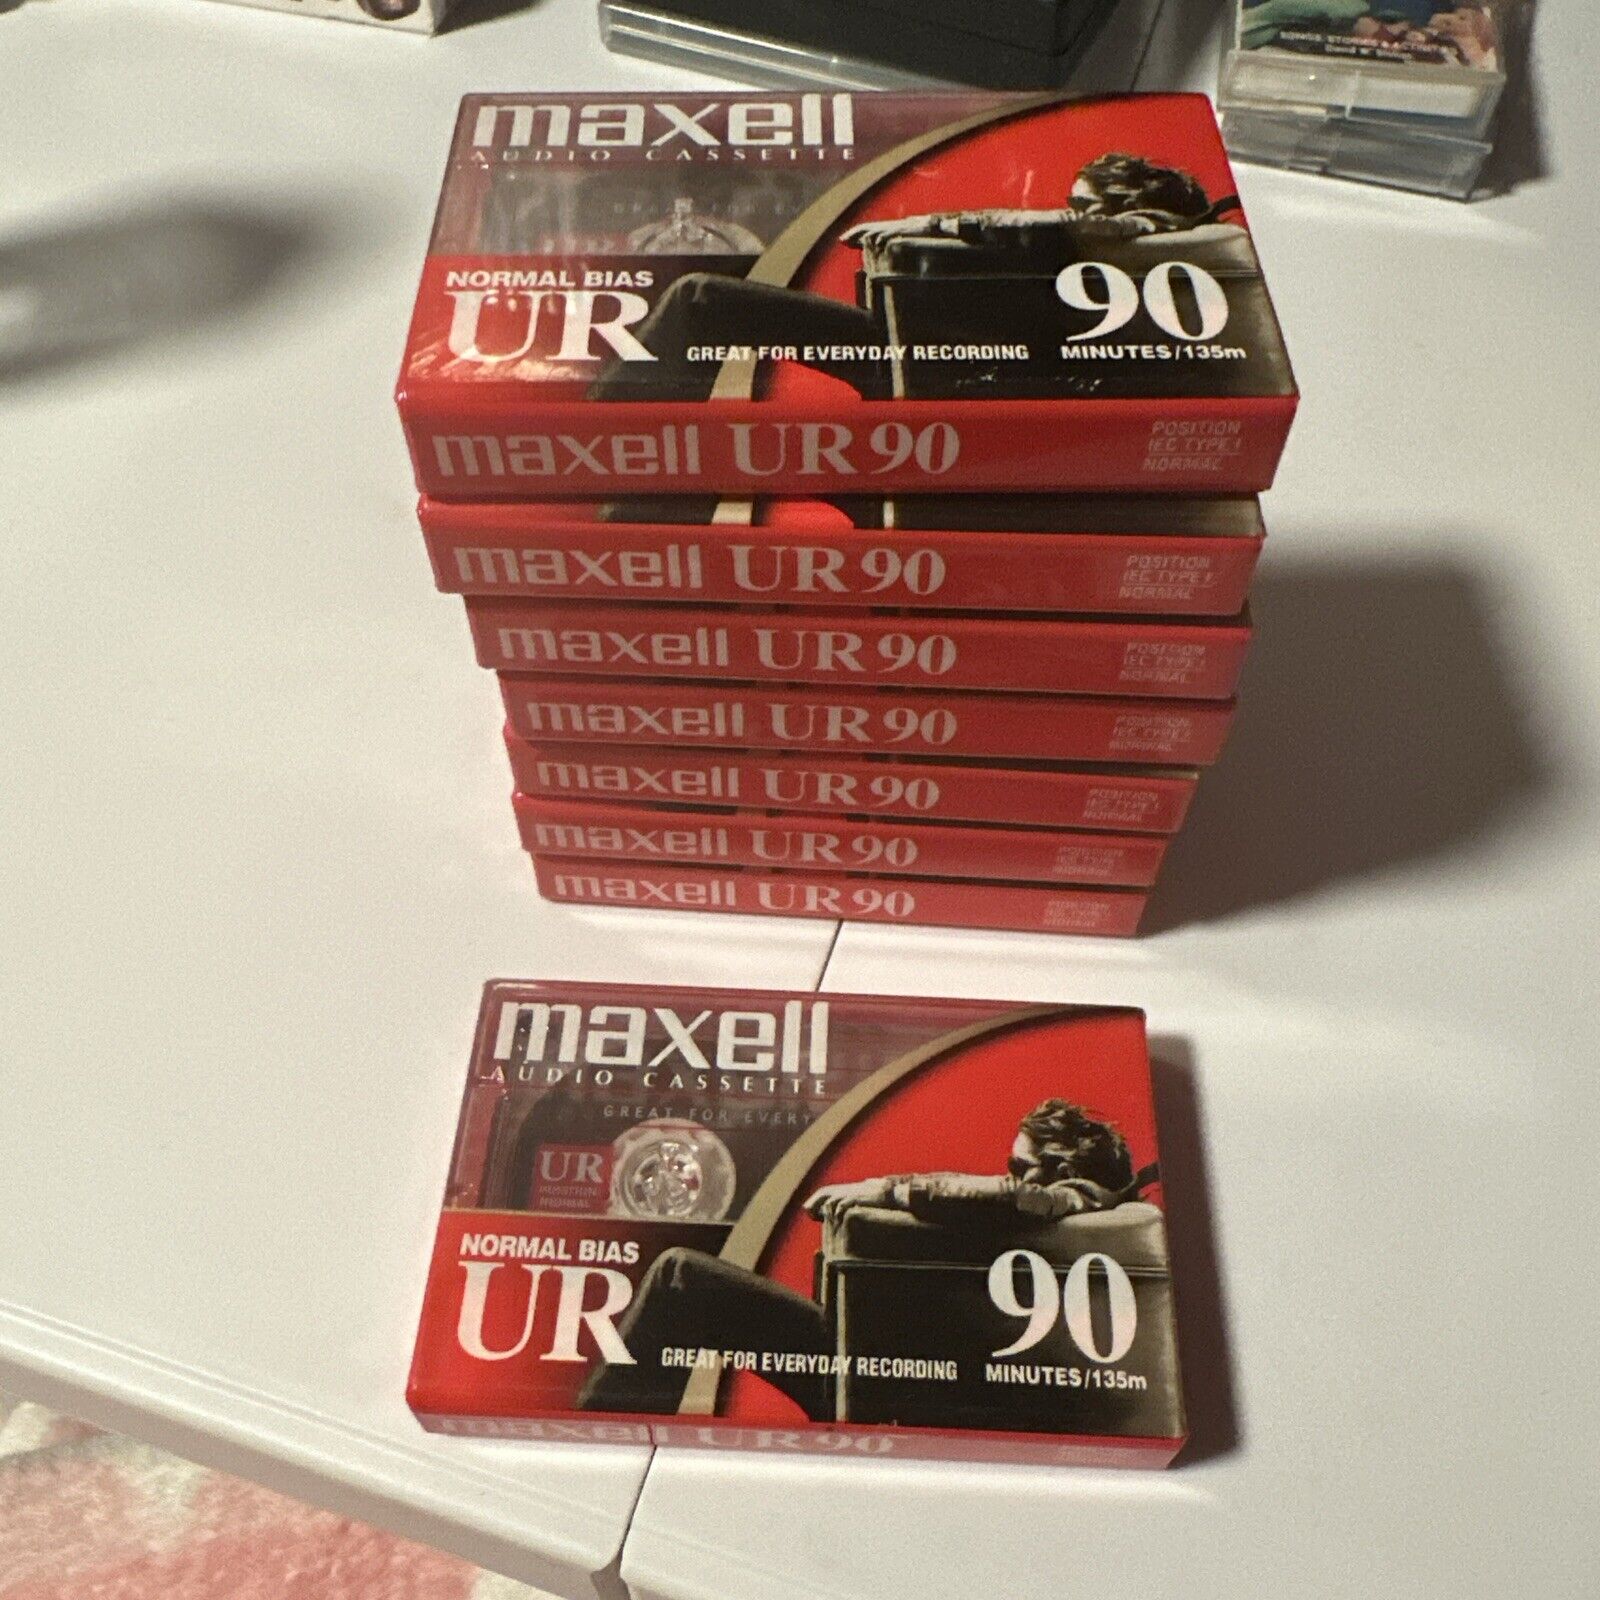 8 Maxell UR-90 Blank Audio Cassettes 90 Min Normal Bias - Factory Sealed